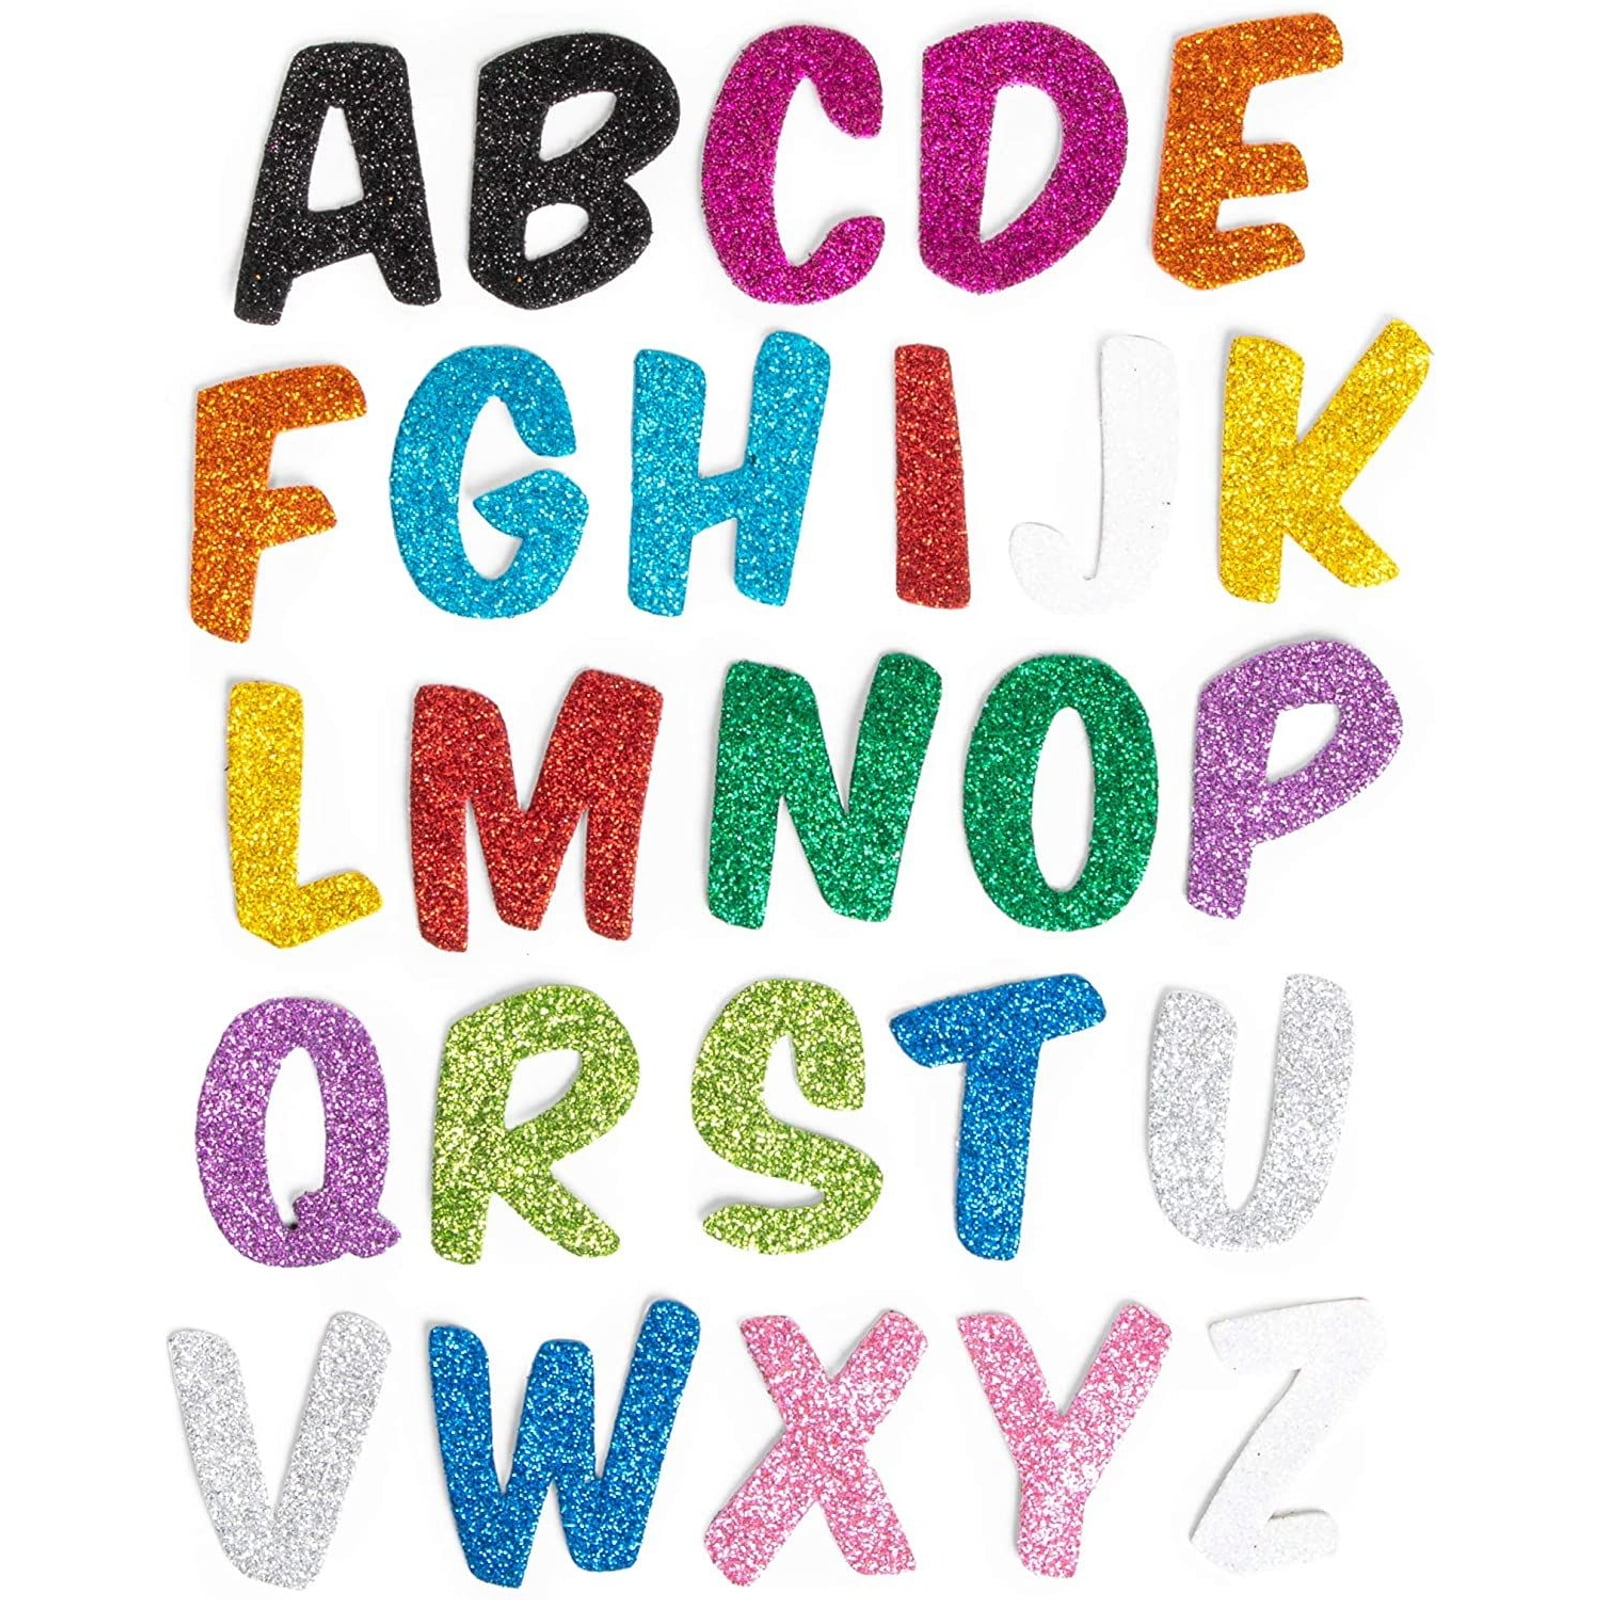 10 Sets of Small Alphabet Letter Foam Glitter Stickers (approx. 260 pcs) 5  Colors - Arts Craft Supplies for Greeting Card Decoration | Size: 1-inch